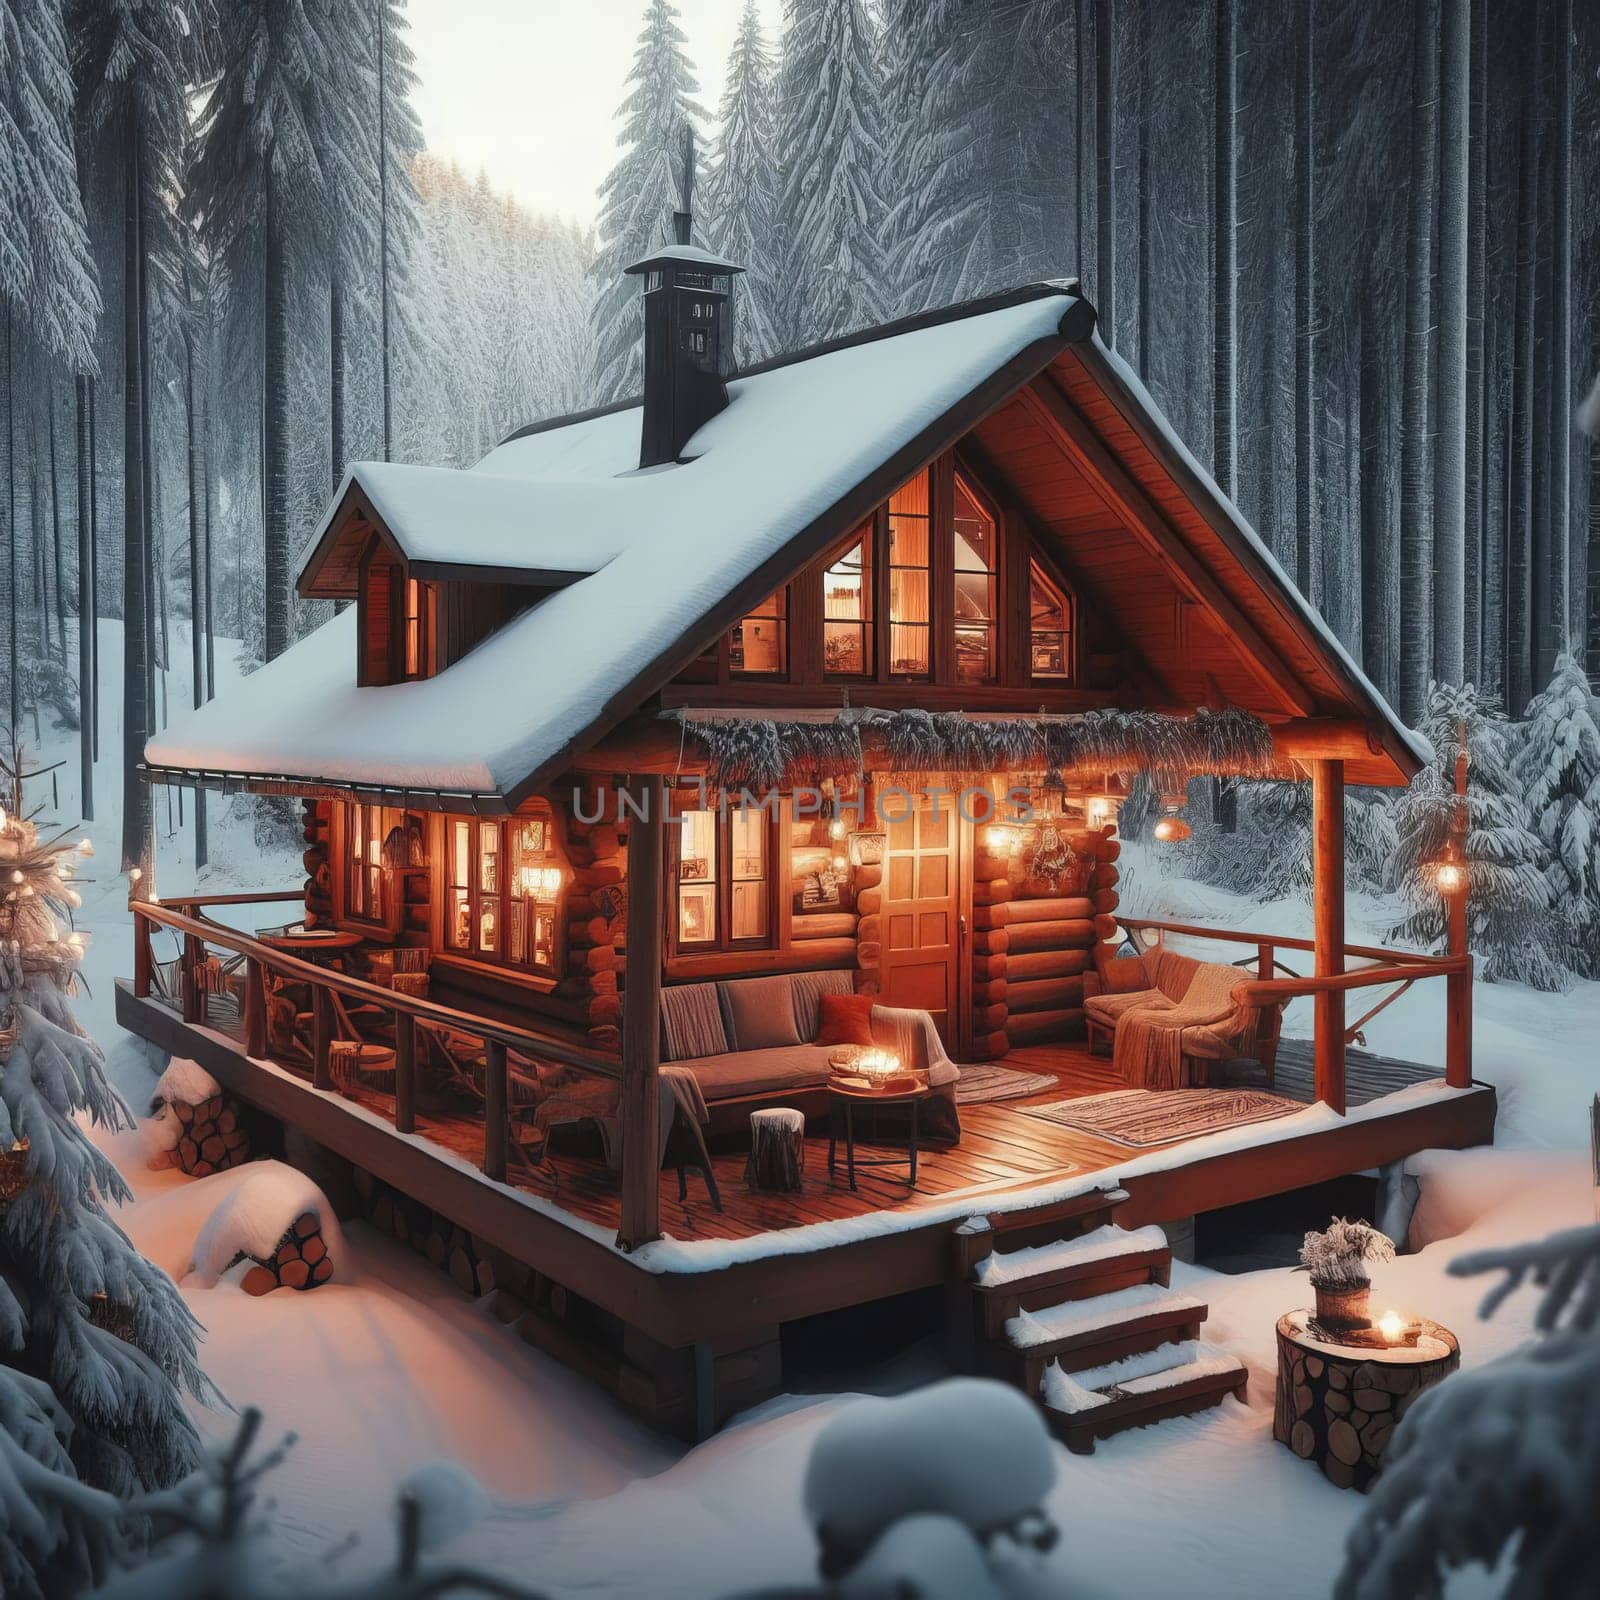 A cozy log cabin in the frozen woods with snow on the roof and warm glow from the windows. by sfinks